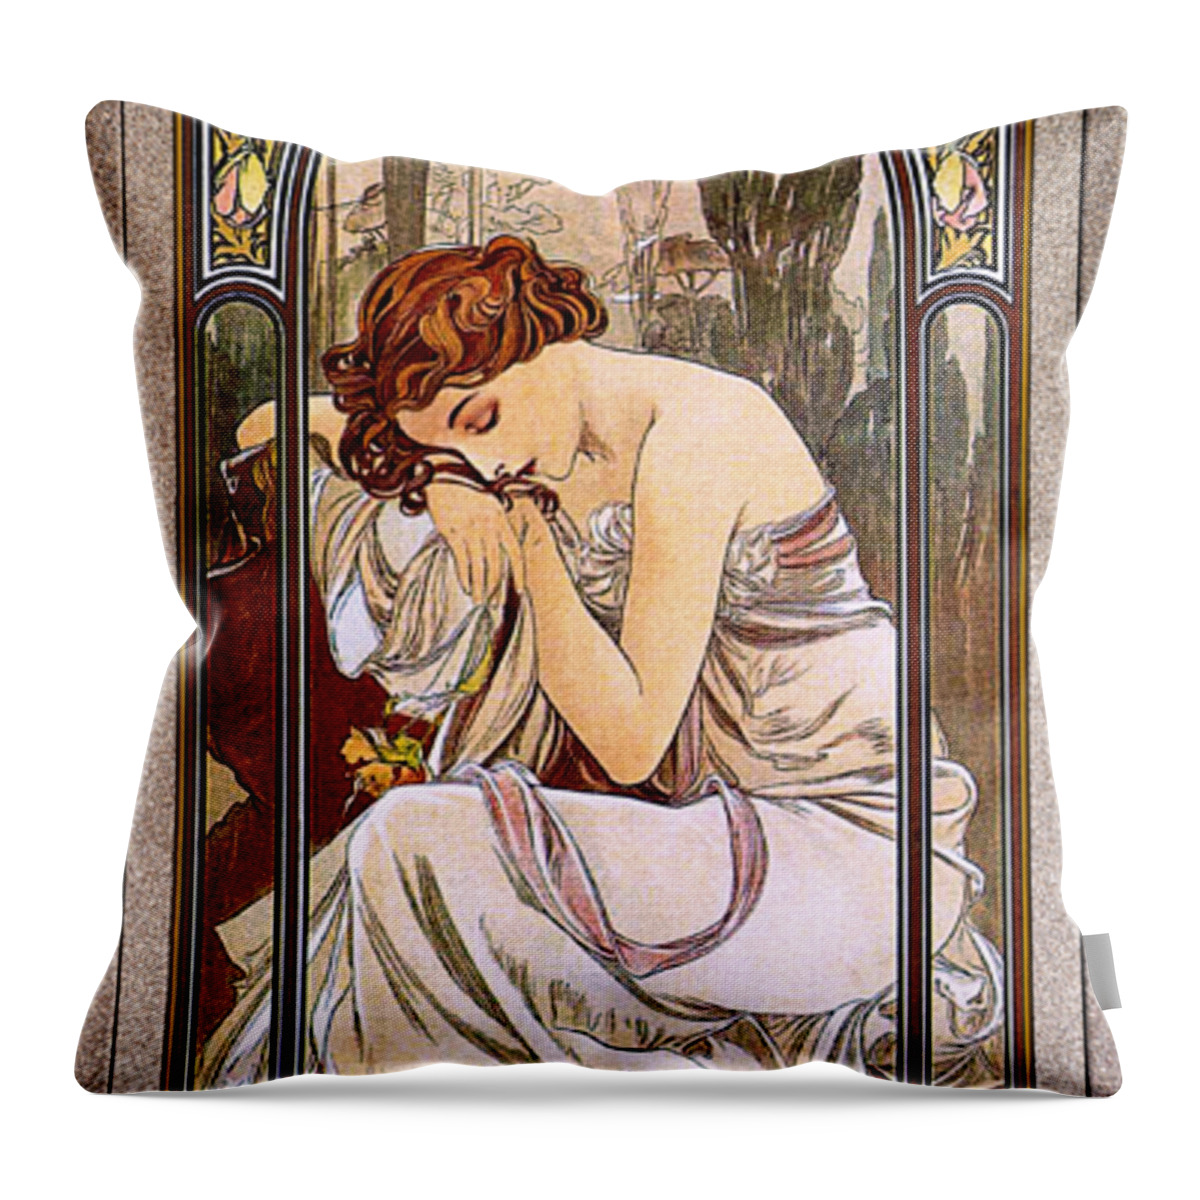 Rest Of The Night Throw Pillow featuring the painting Rest Of The Night by Alphonse Mucha by Rolando Burbon